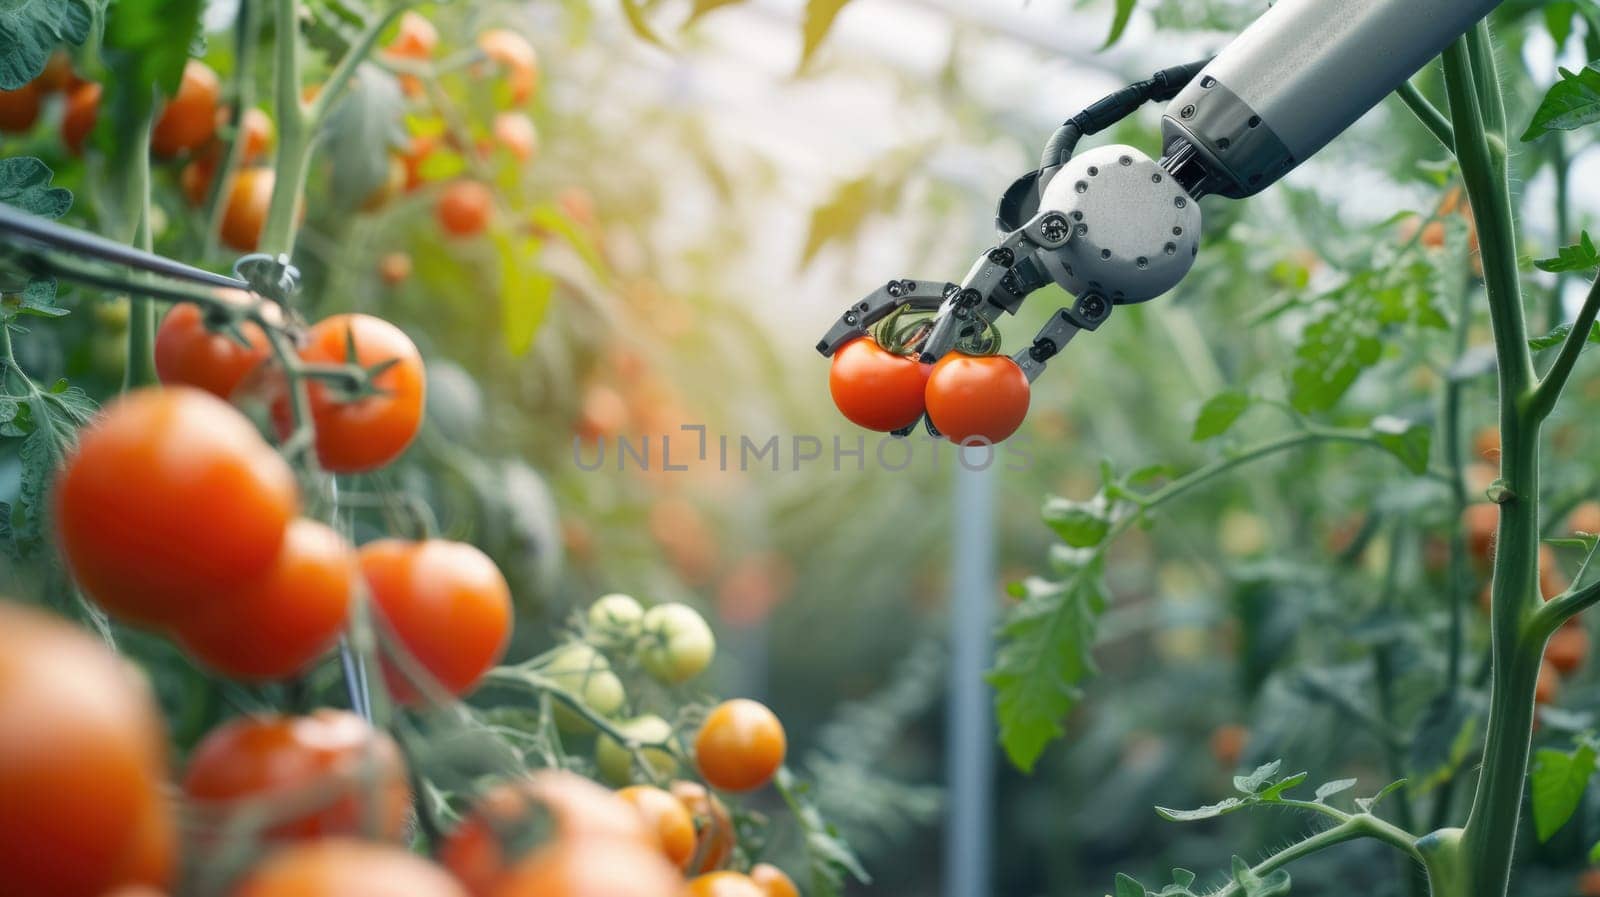 A robotic arm is picking tomatoes in a greenhouse AIG41 by biancoblue